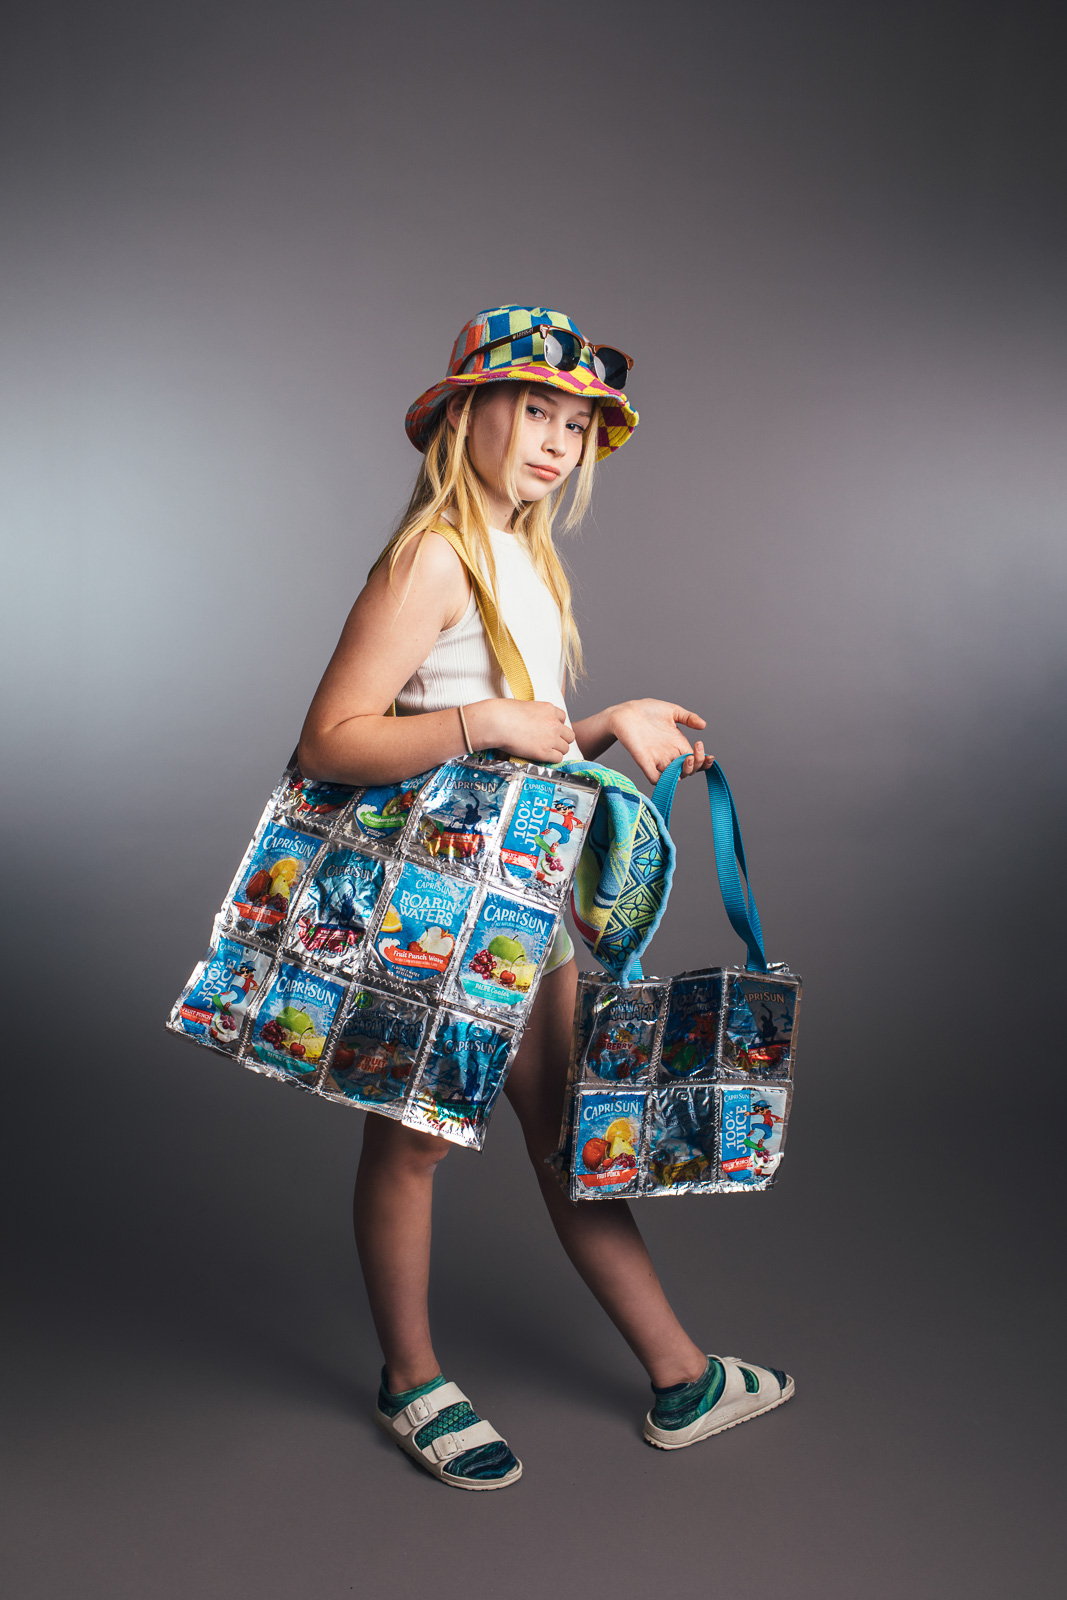 2023 Upcycled Fashion Show portrait by portrait artist, Kerry Struble, of Birch Blaze Studios located in Wakefield, NH. Beach totes handcrafted from empty juice pouches, perfect for a day at the beach!